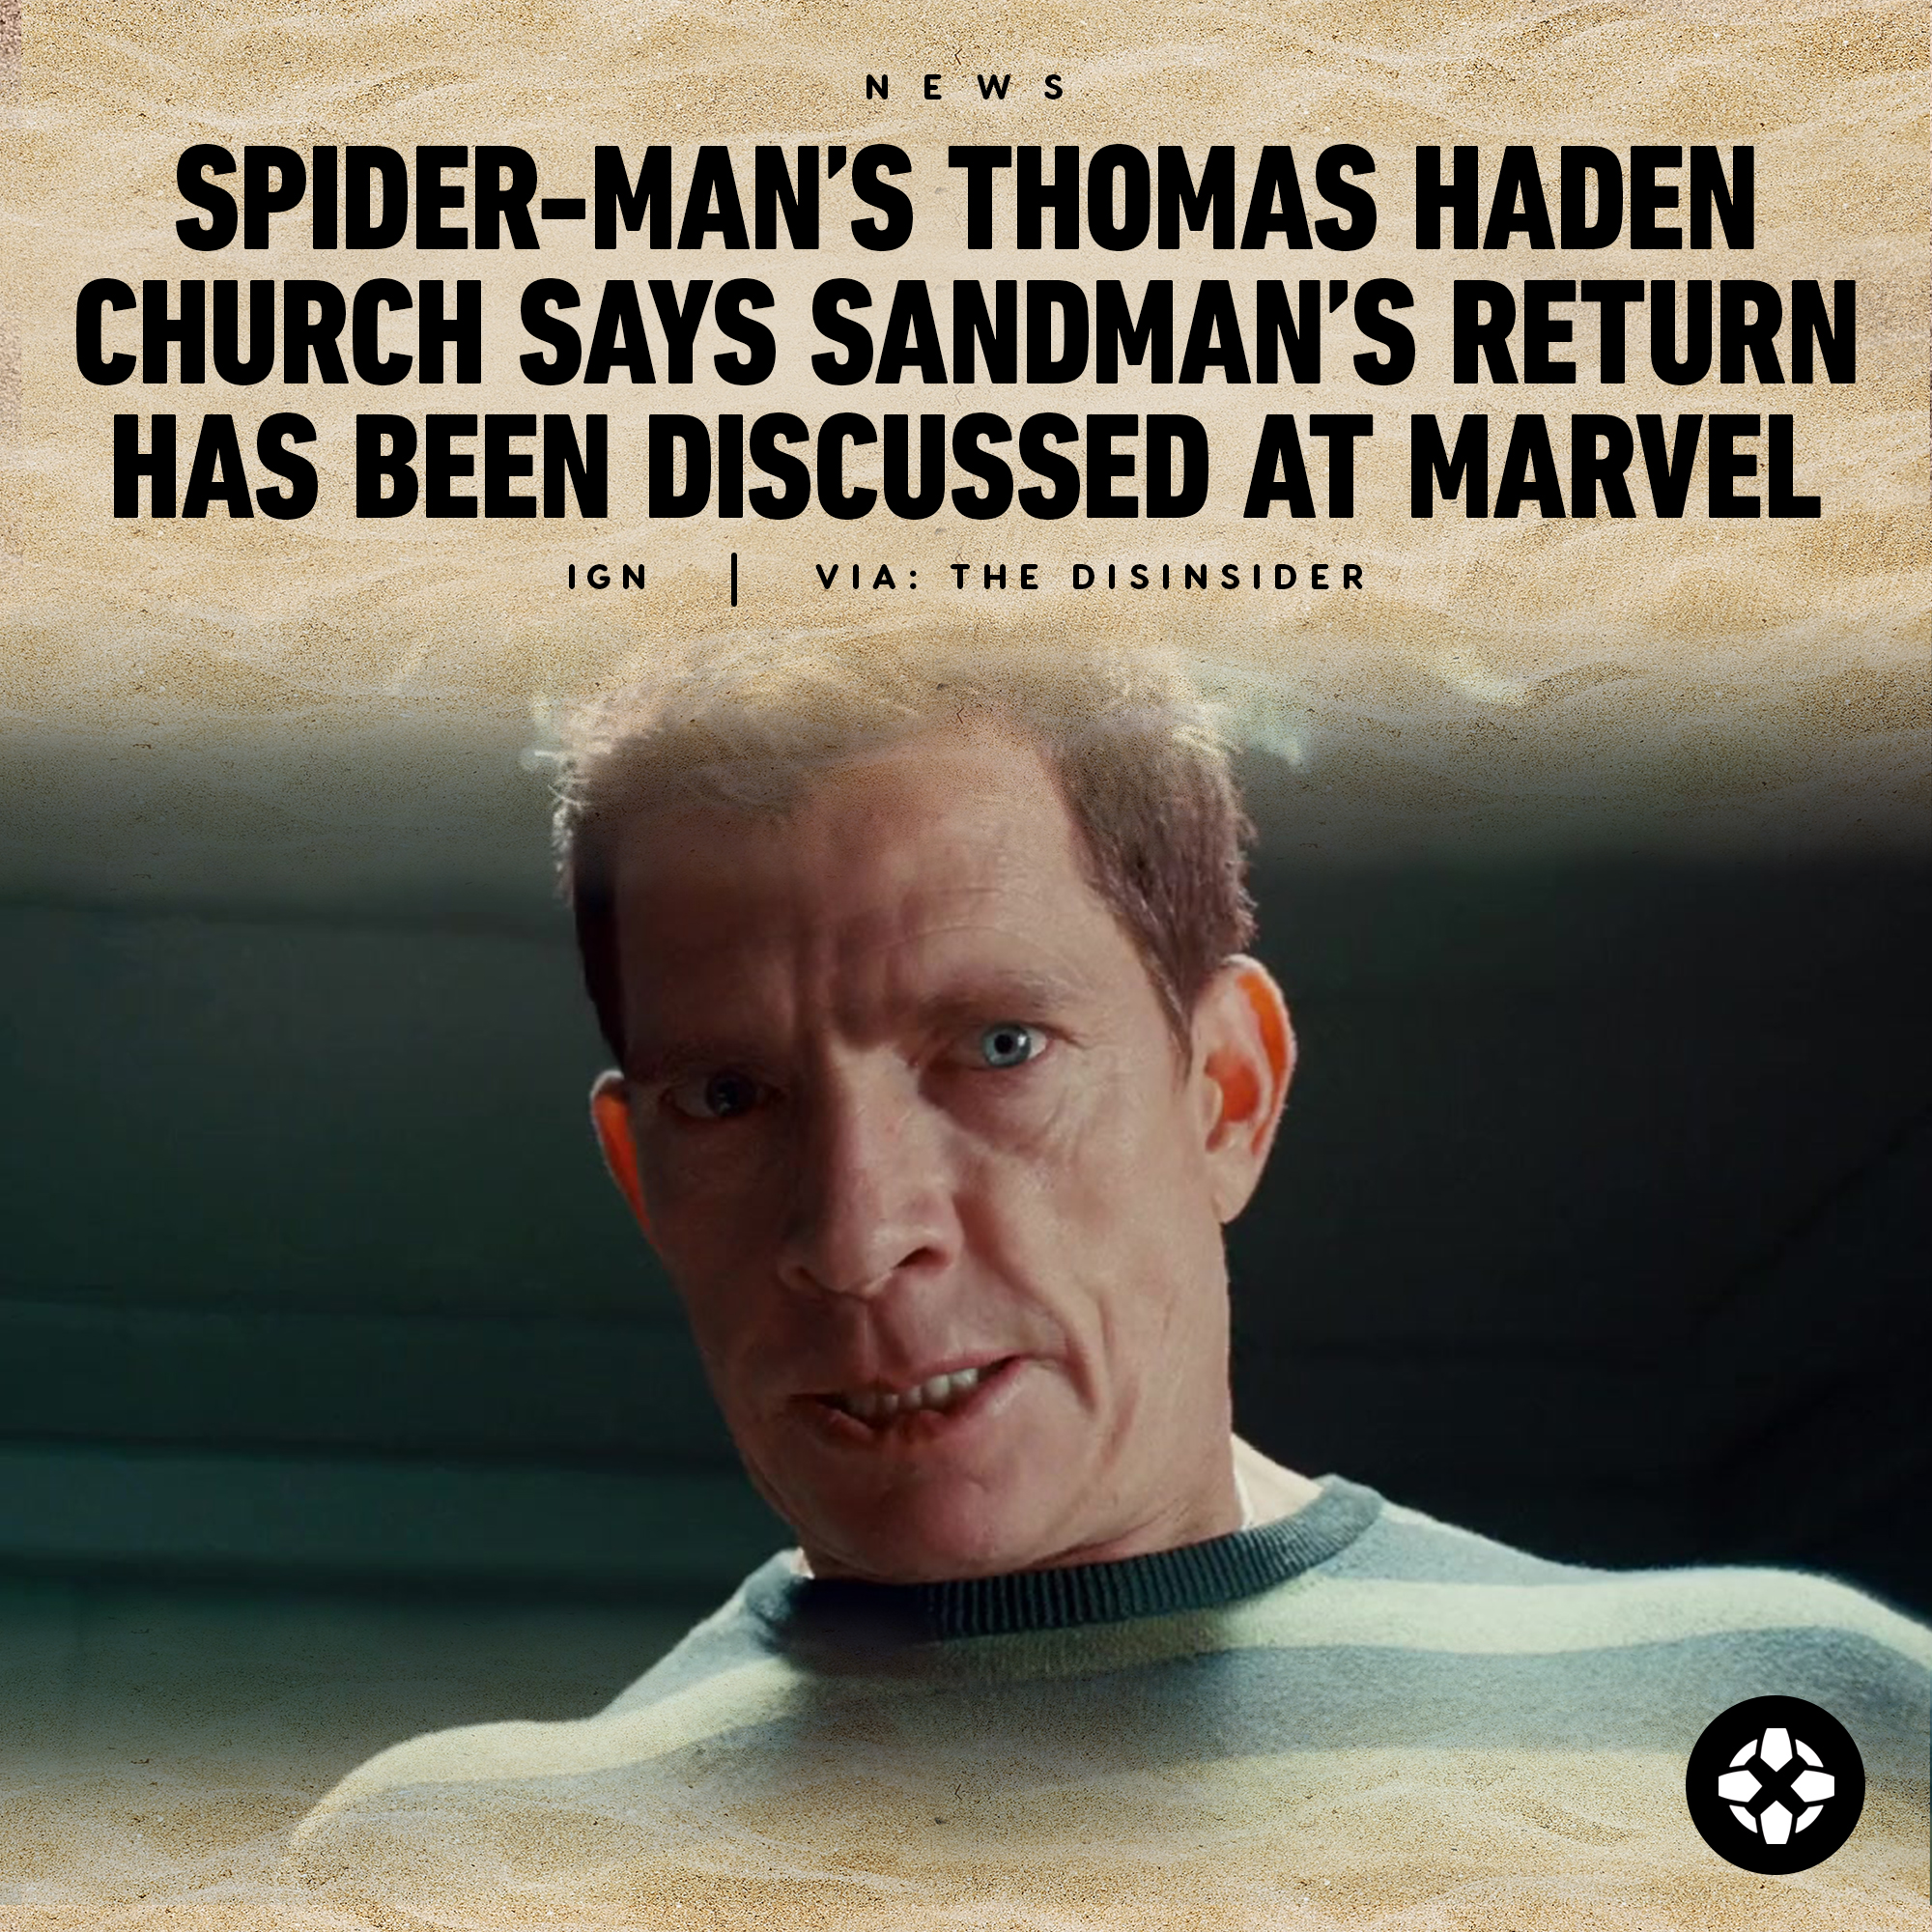 IGN on X: Spider-Man villain Sandman could return to the Marvel movie  universe, according to actor Thomas Haden Church, who said a future  appearance could see the character boast “a more fulfilling